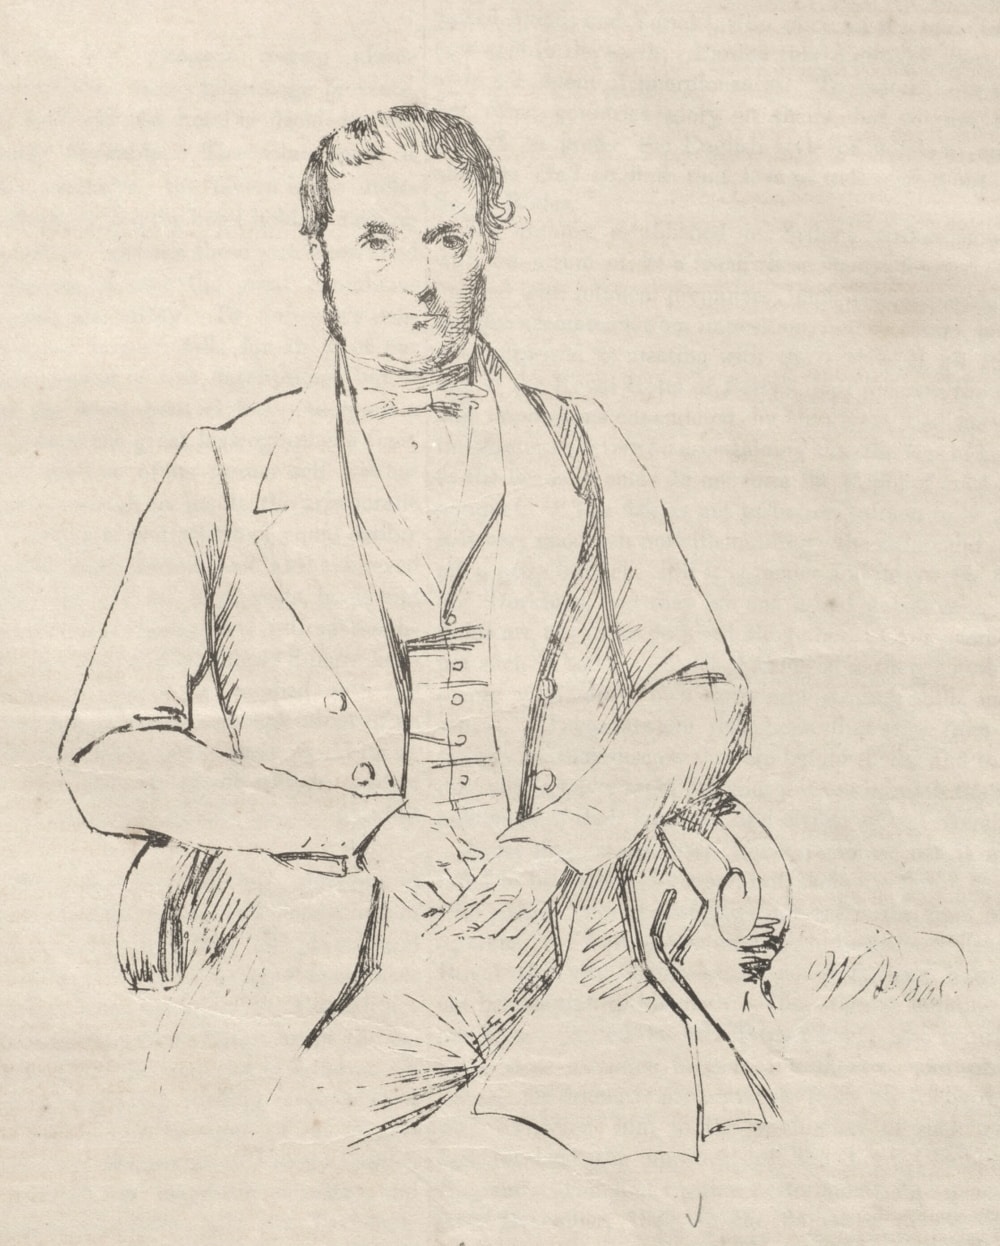 John Sparke, hotel keeper, Royal Hotel, Sydney; Heads of the people (18 March 1848)